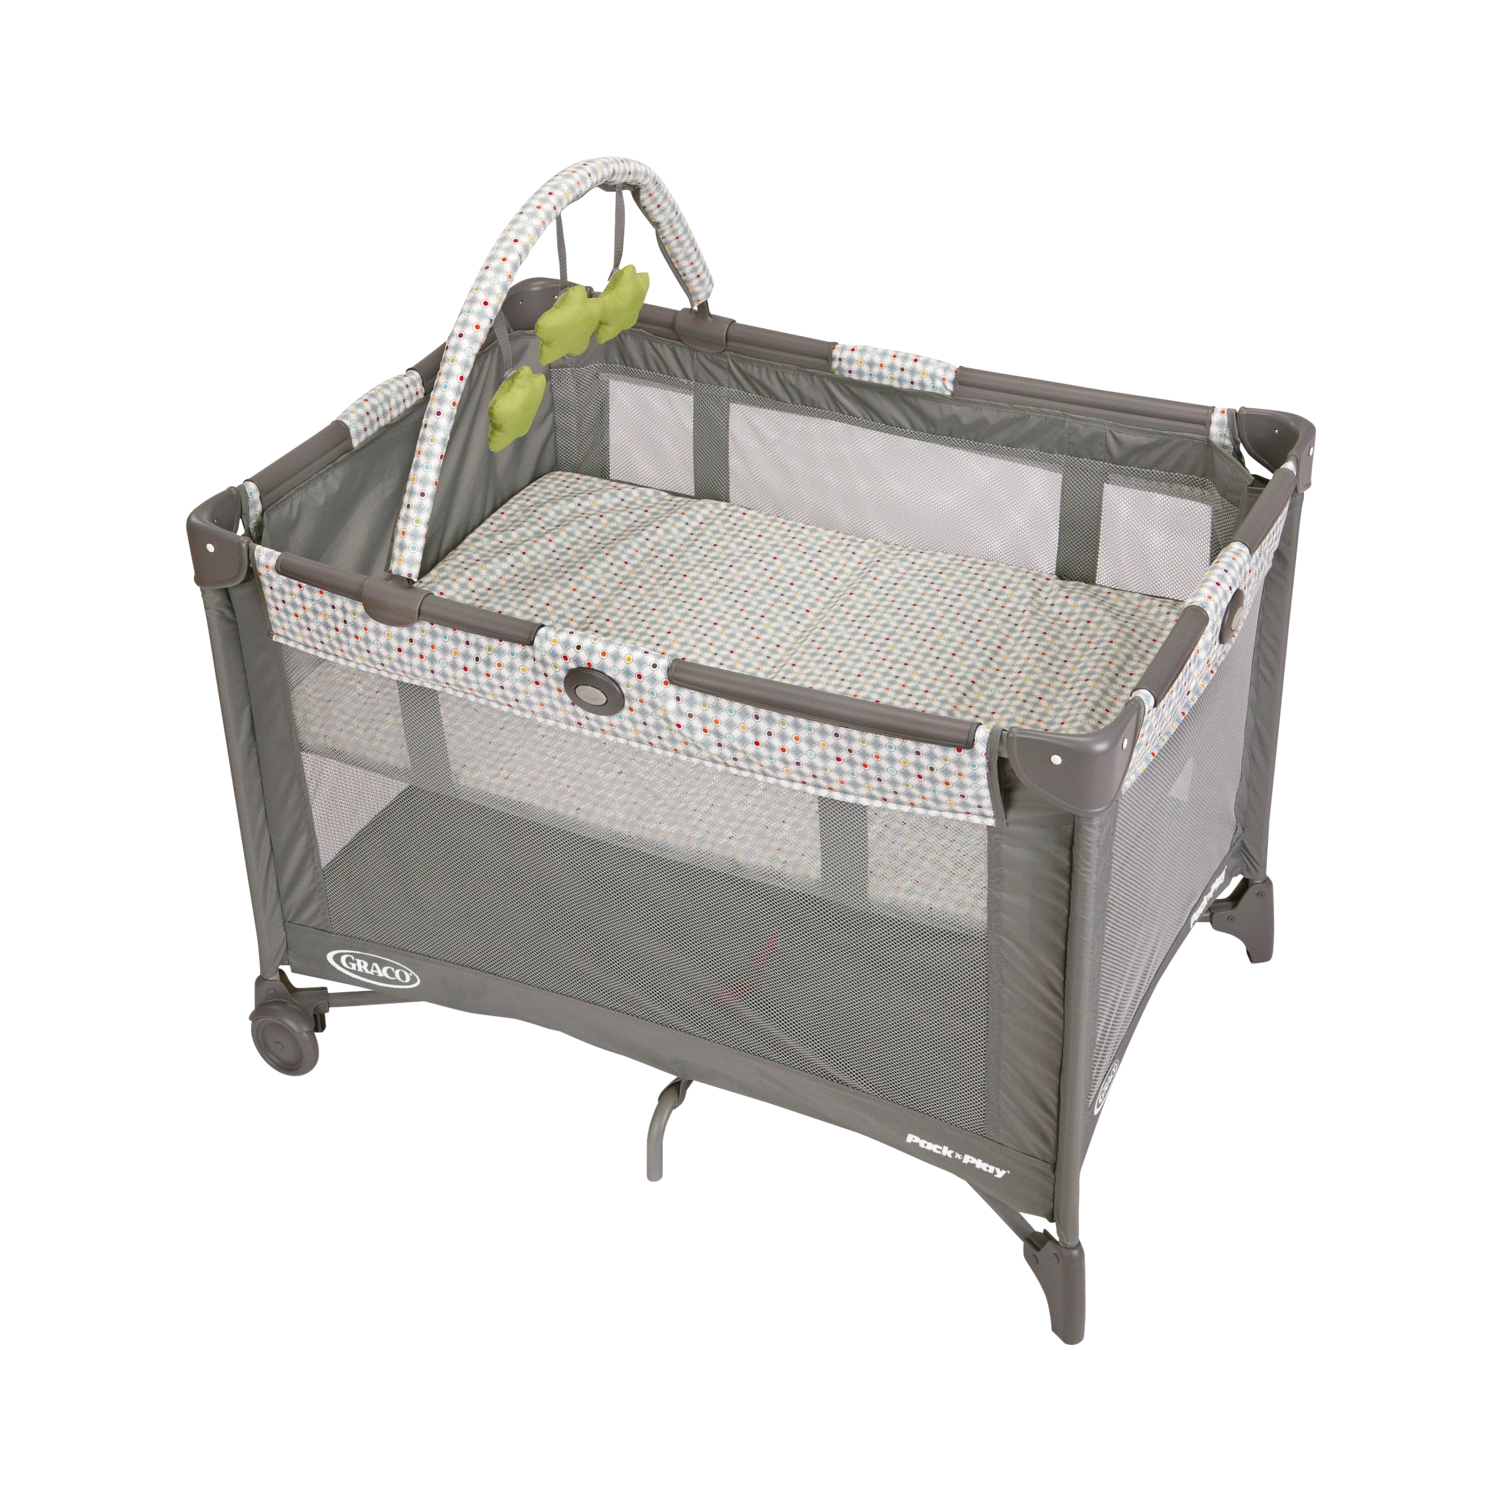 graco baby bed